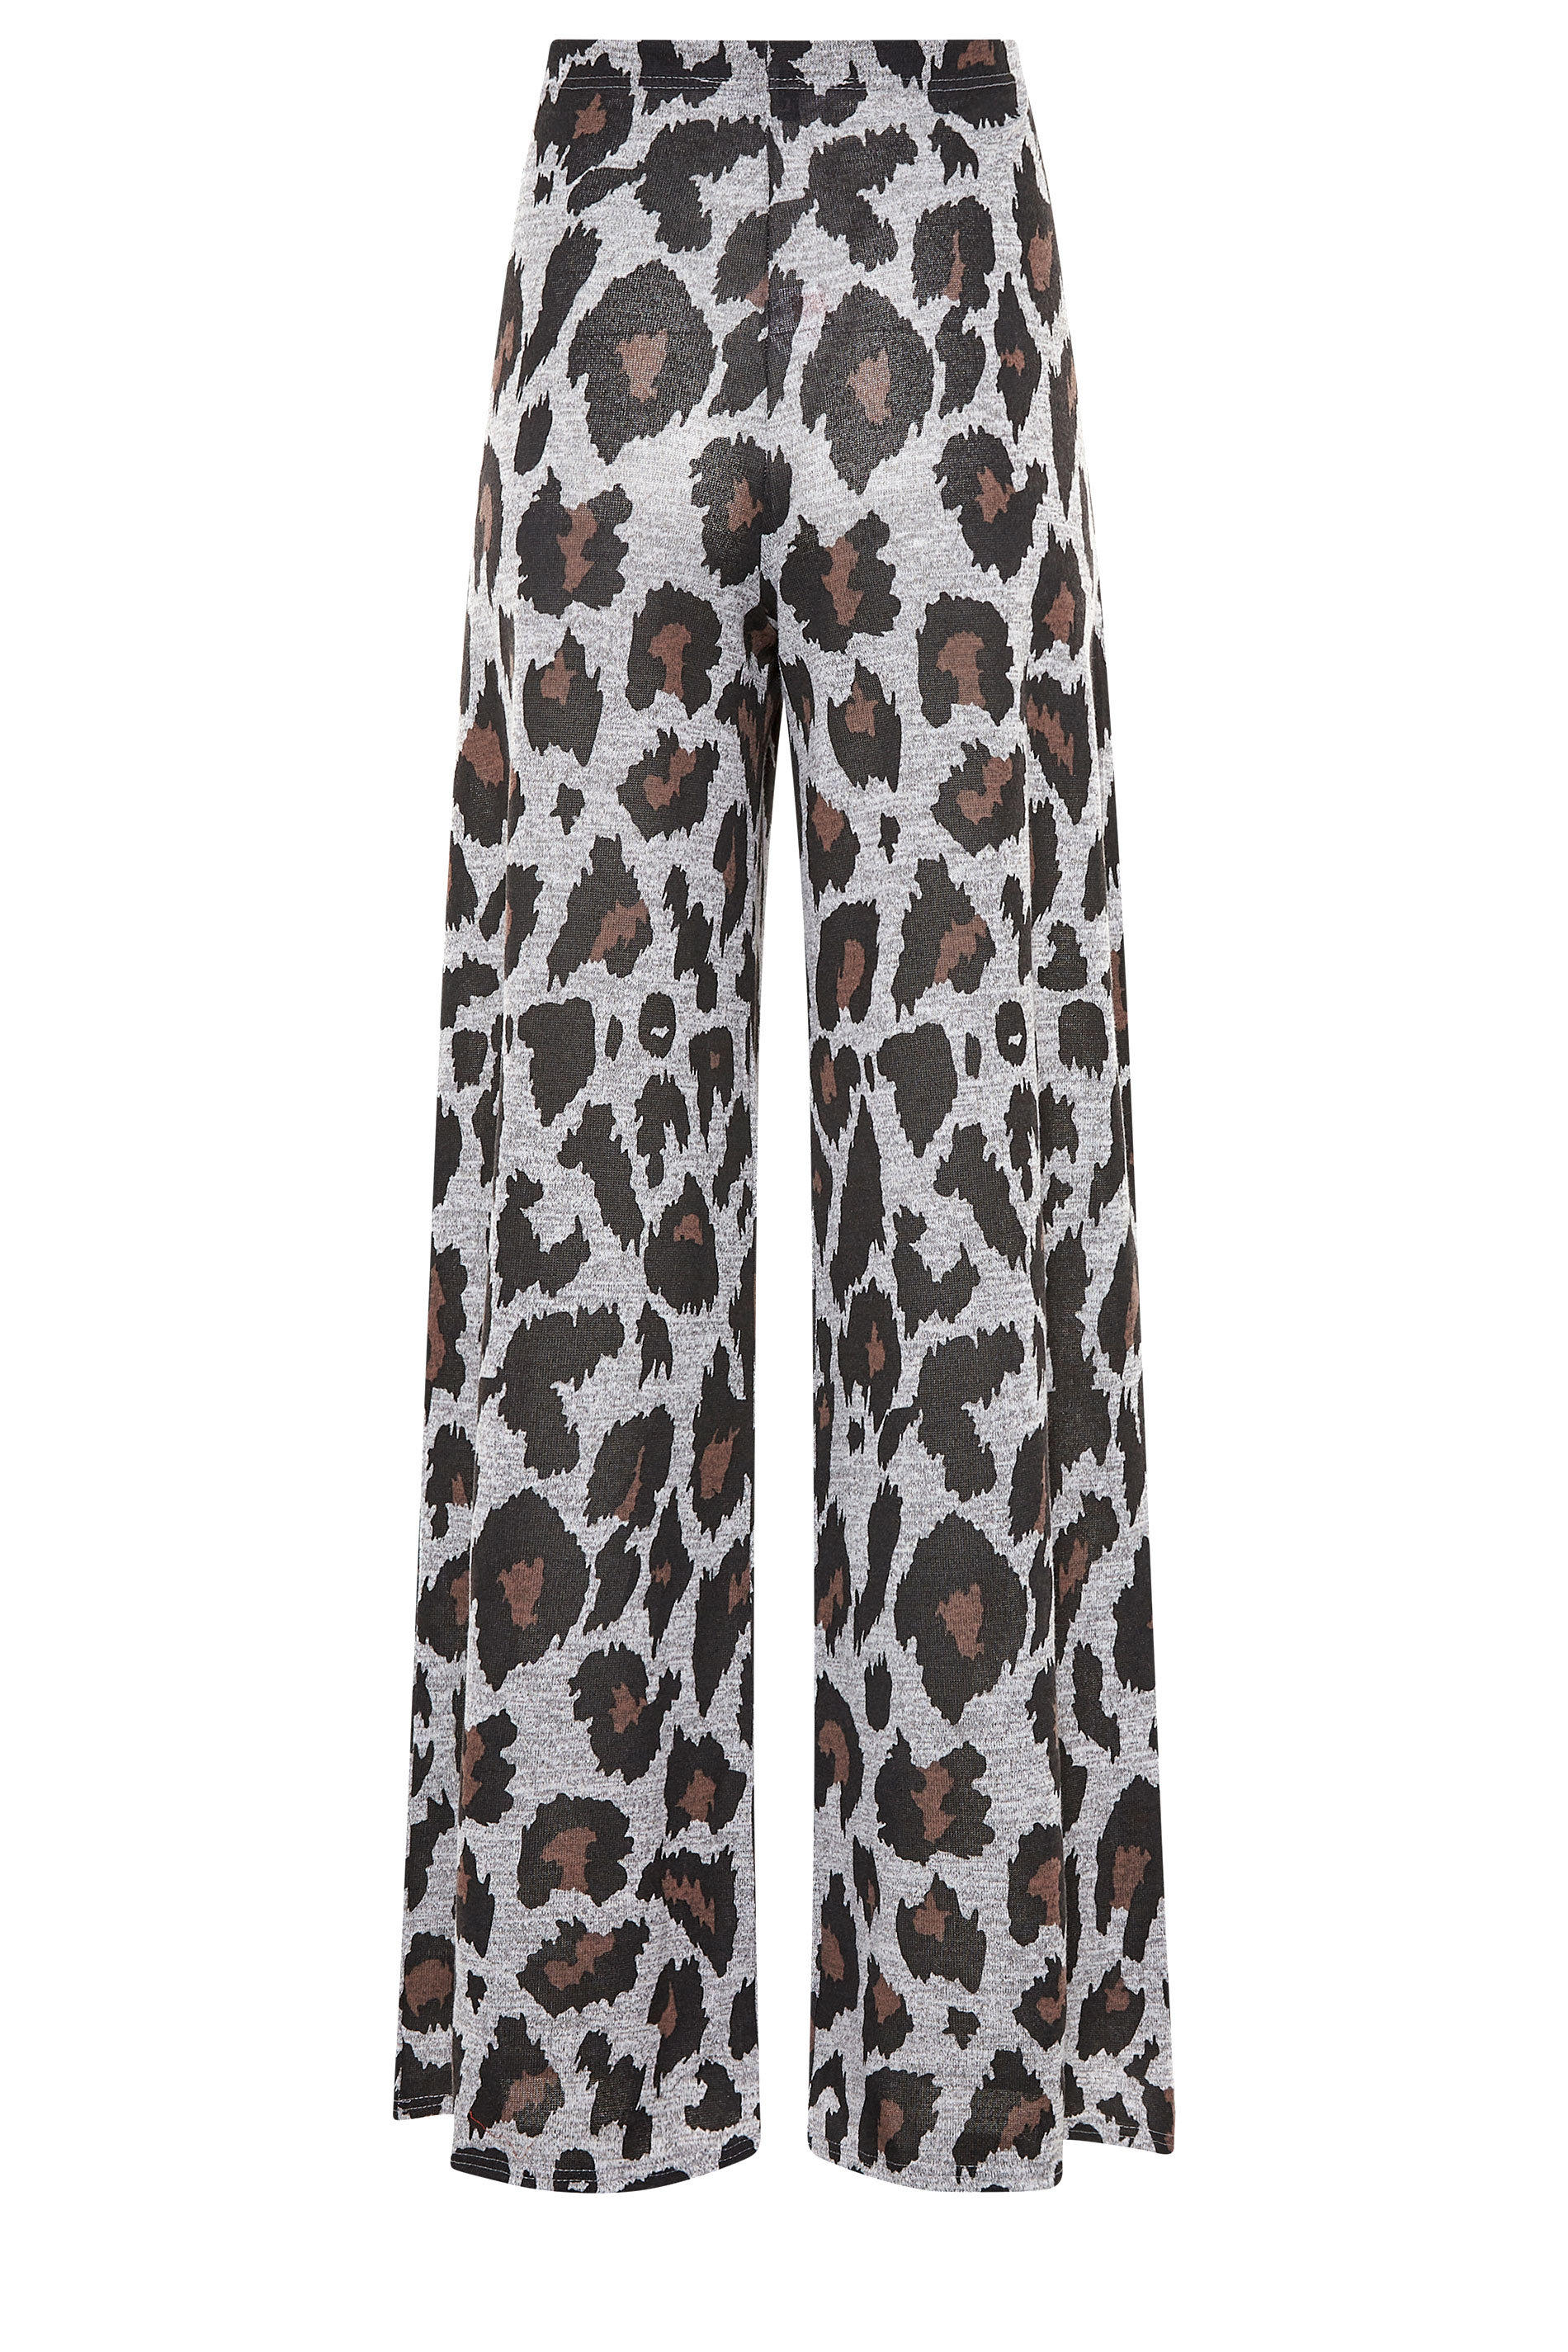 LTS Grey Leopard Print Lounge Trousers | Long Tall Sally